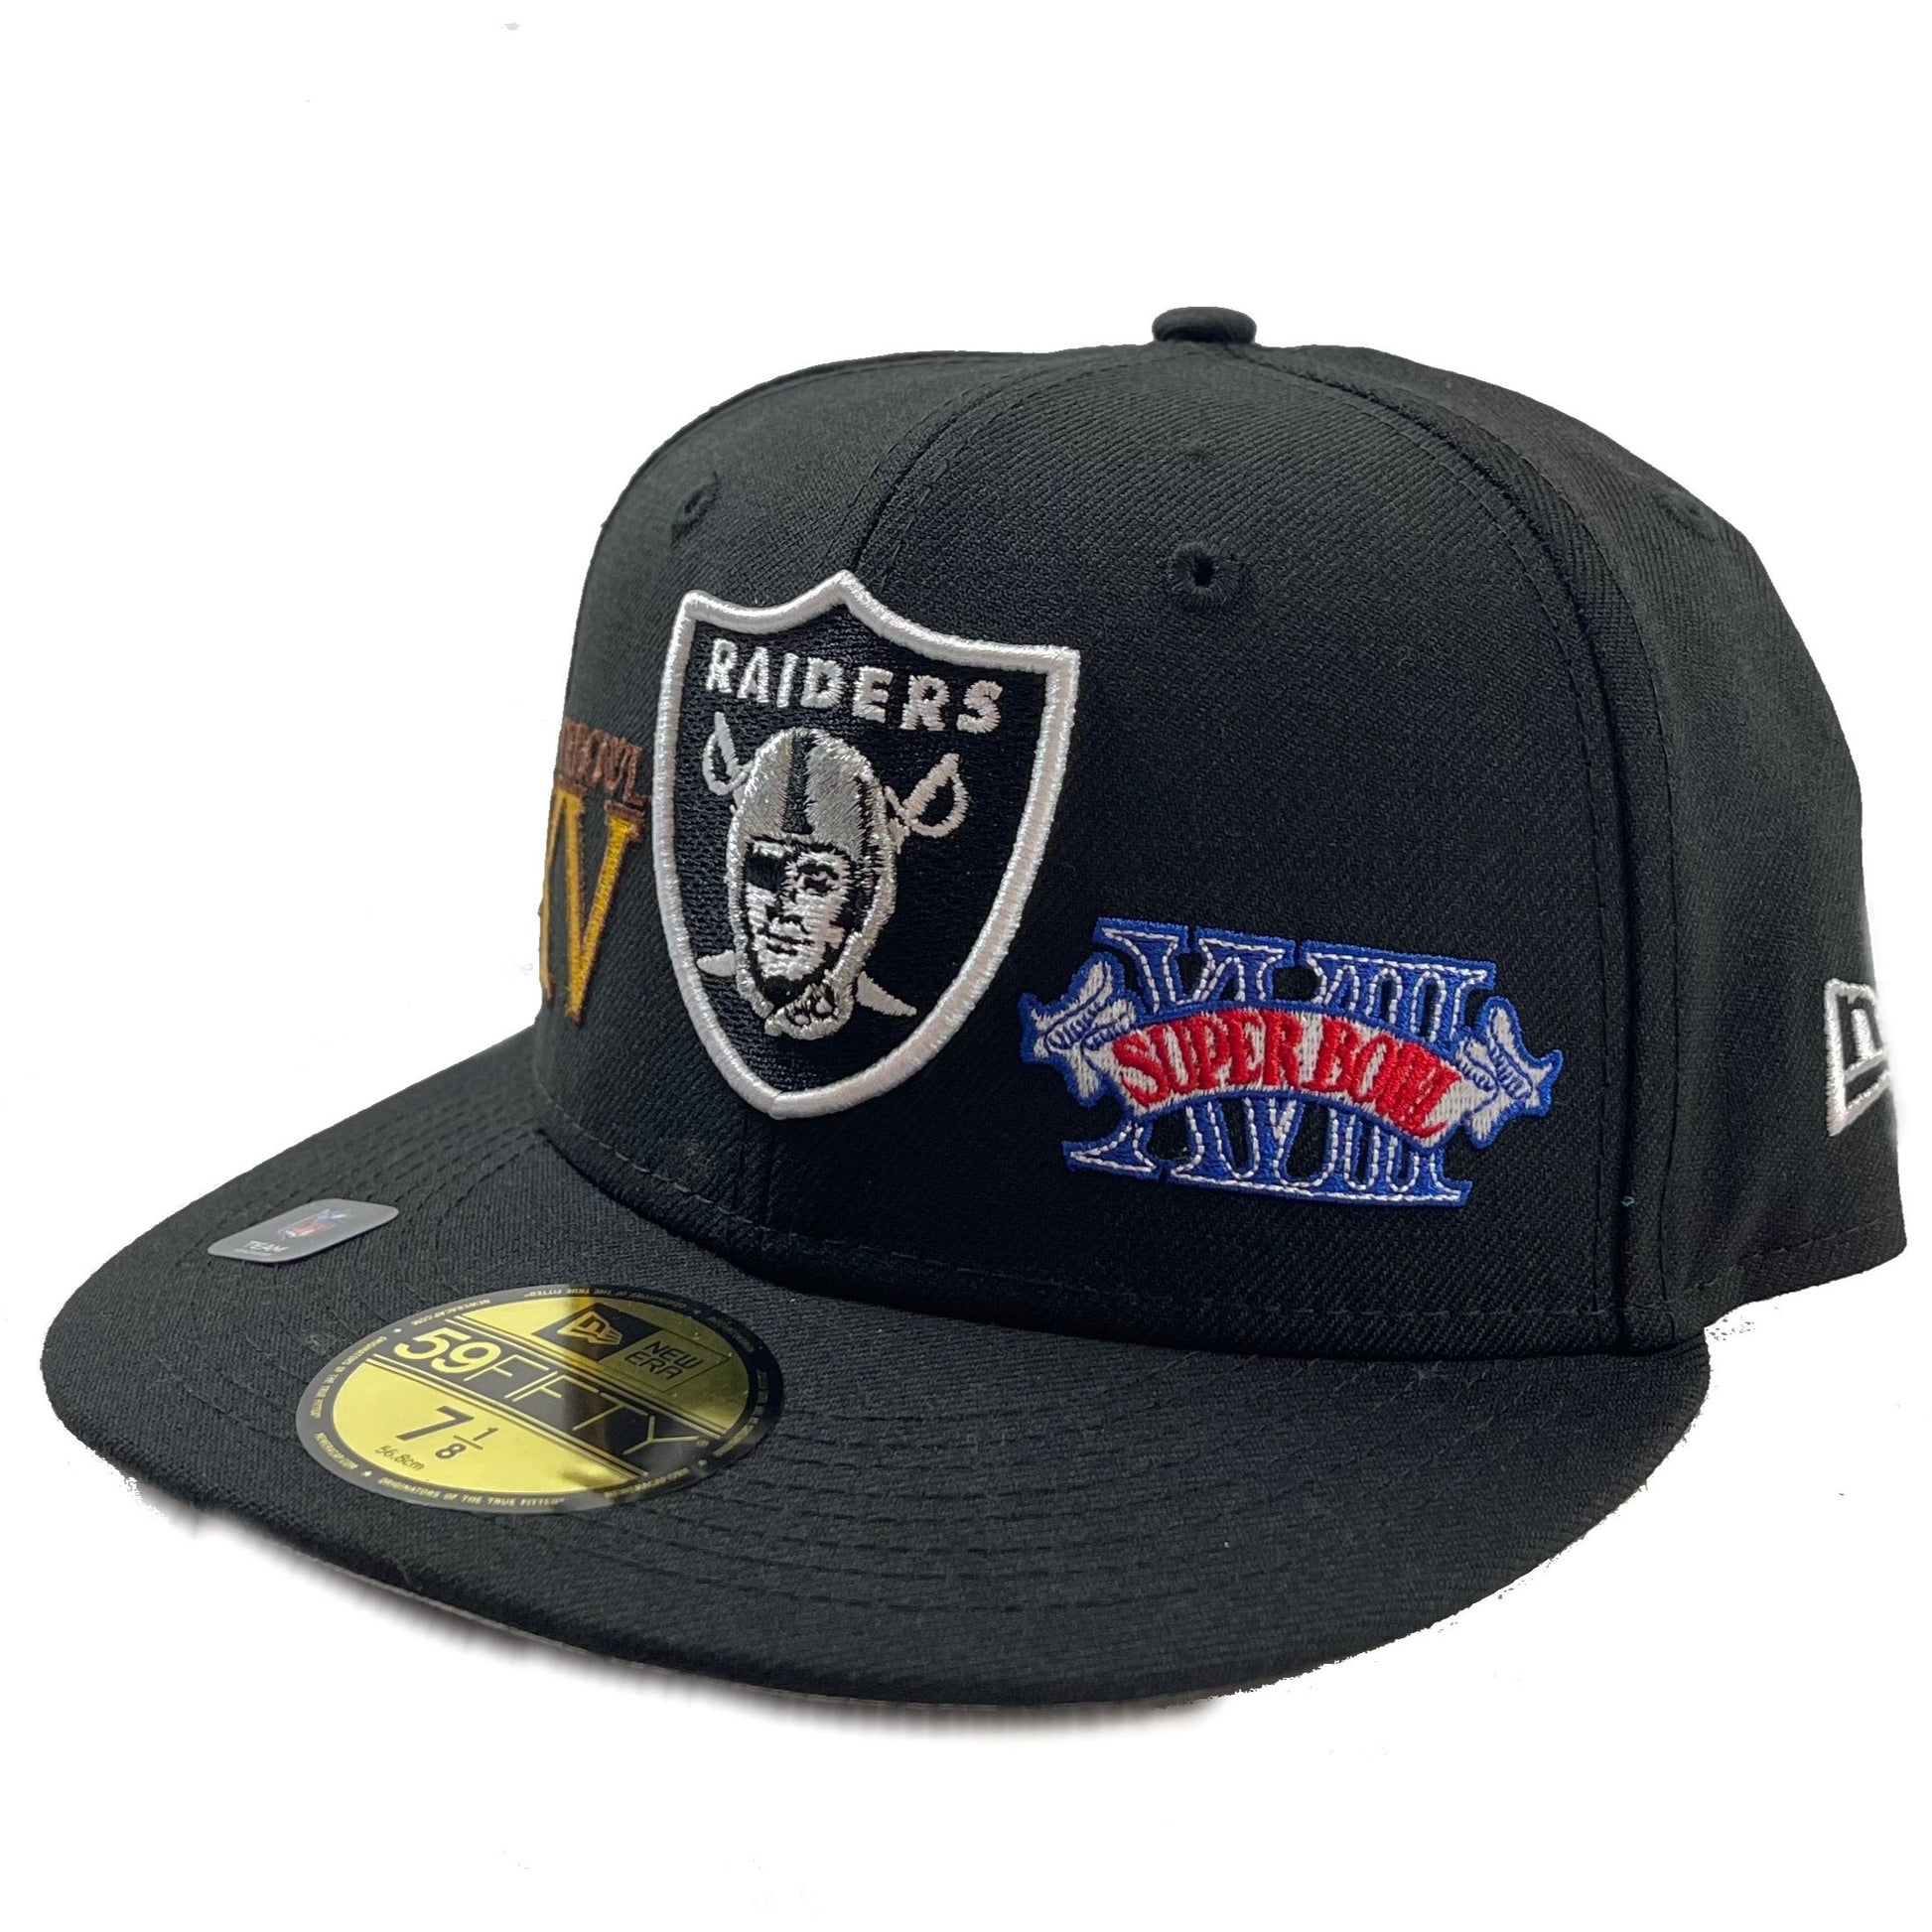 Raiders Patches (Black) Fitted – Cap World: Embroidery